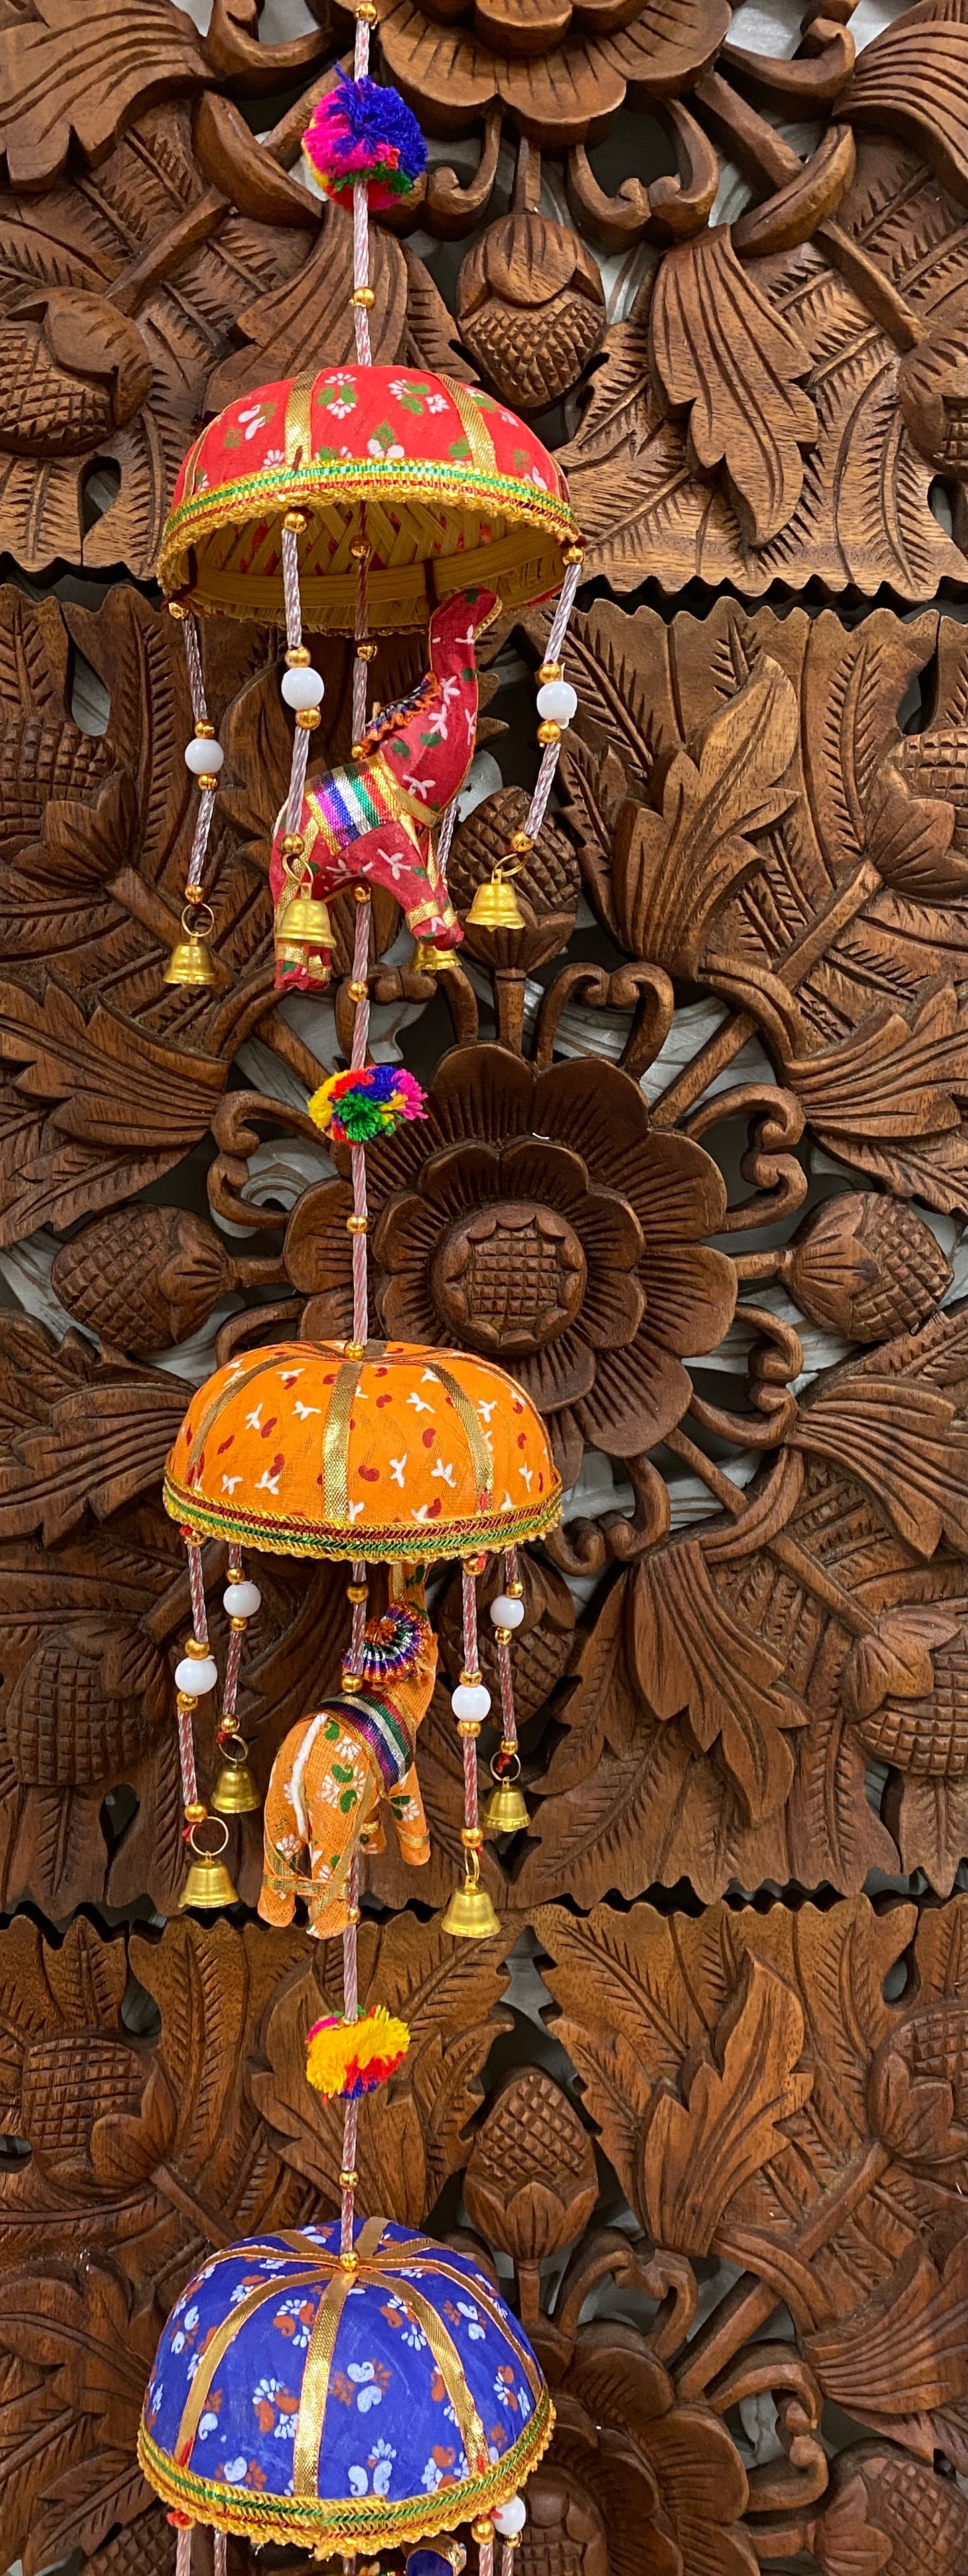 Rajastani Hanging Mobiles with strings of Elephants